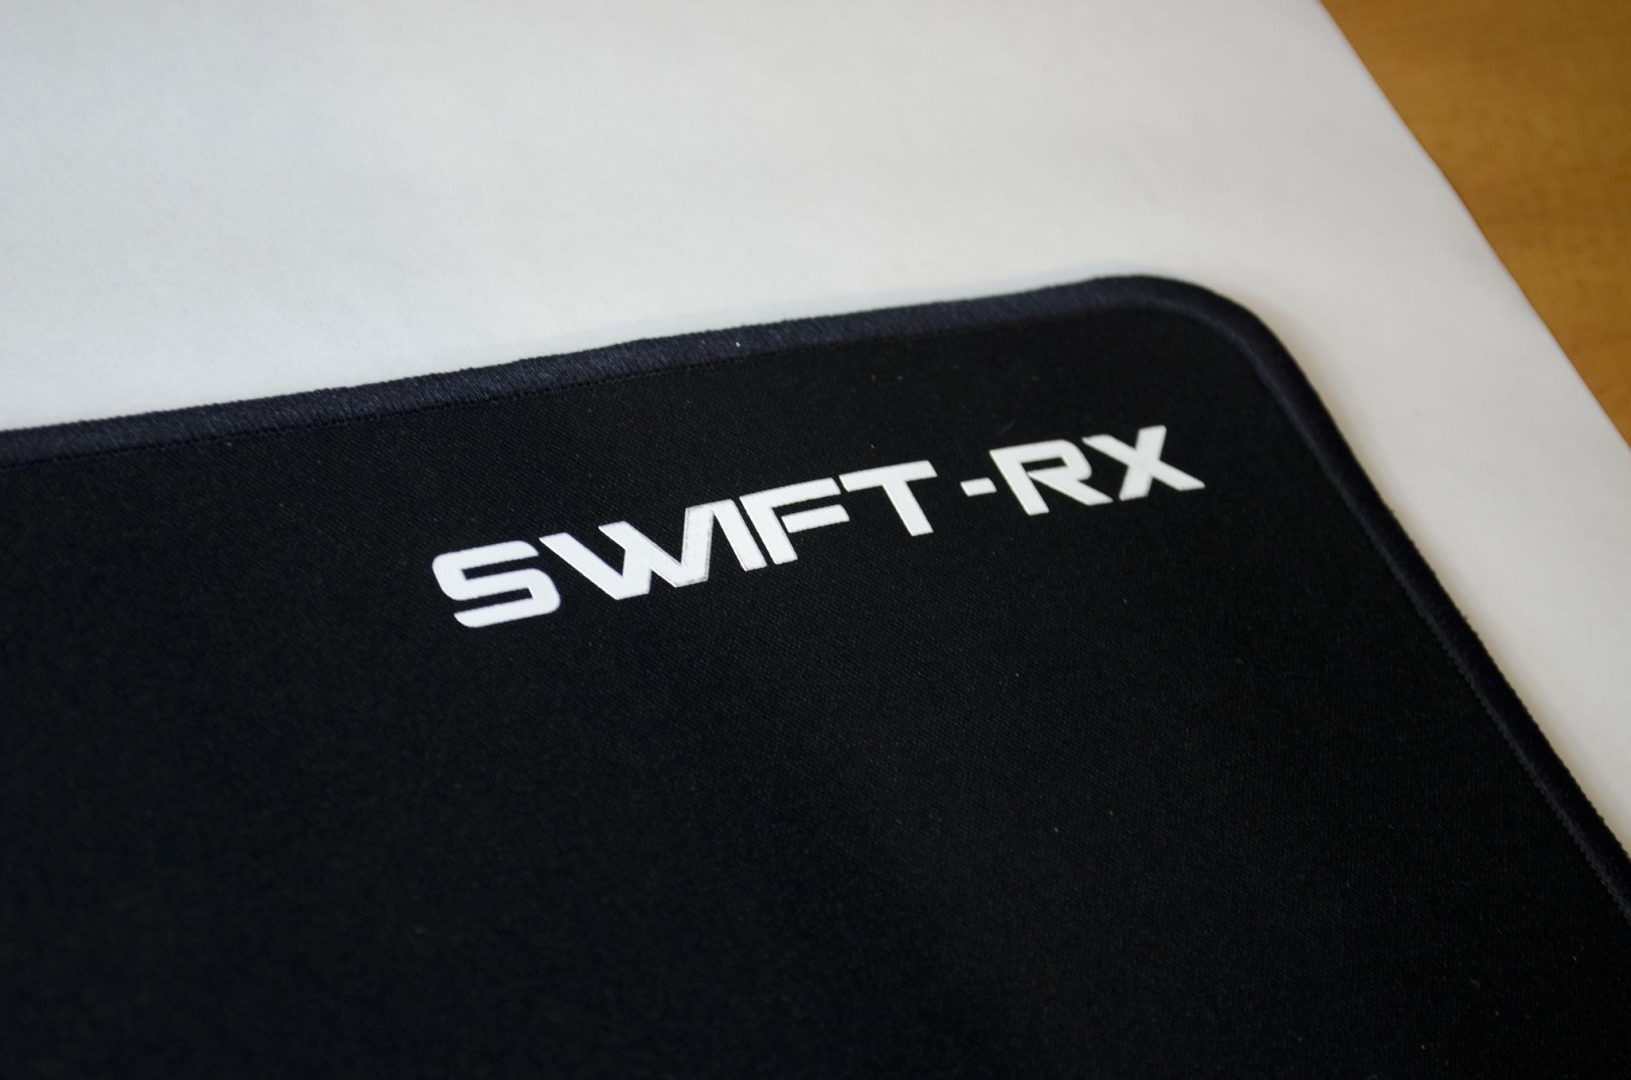 cooler master swift rx mousepad review_3